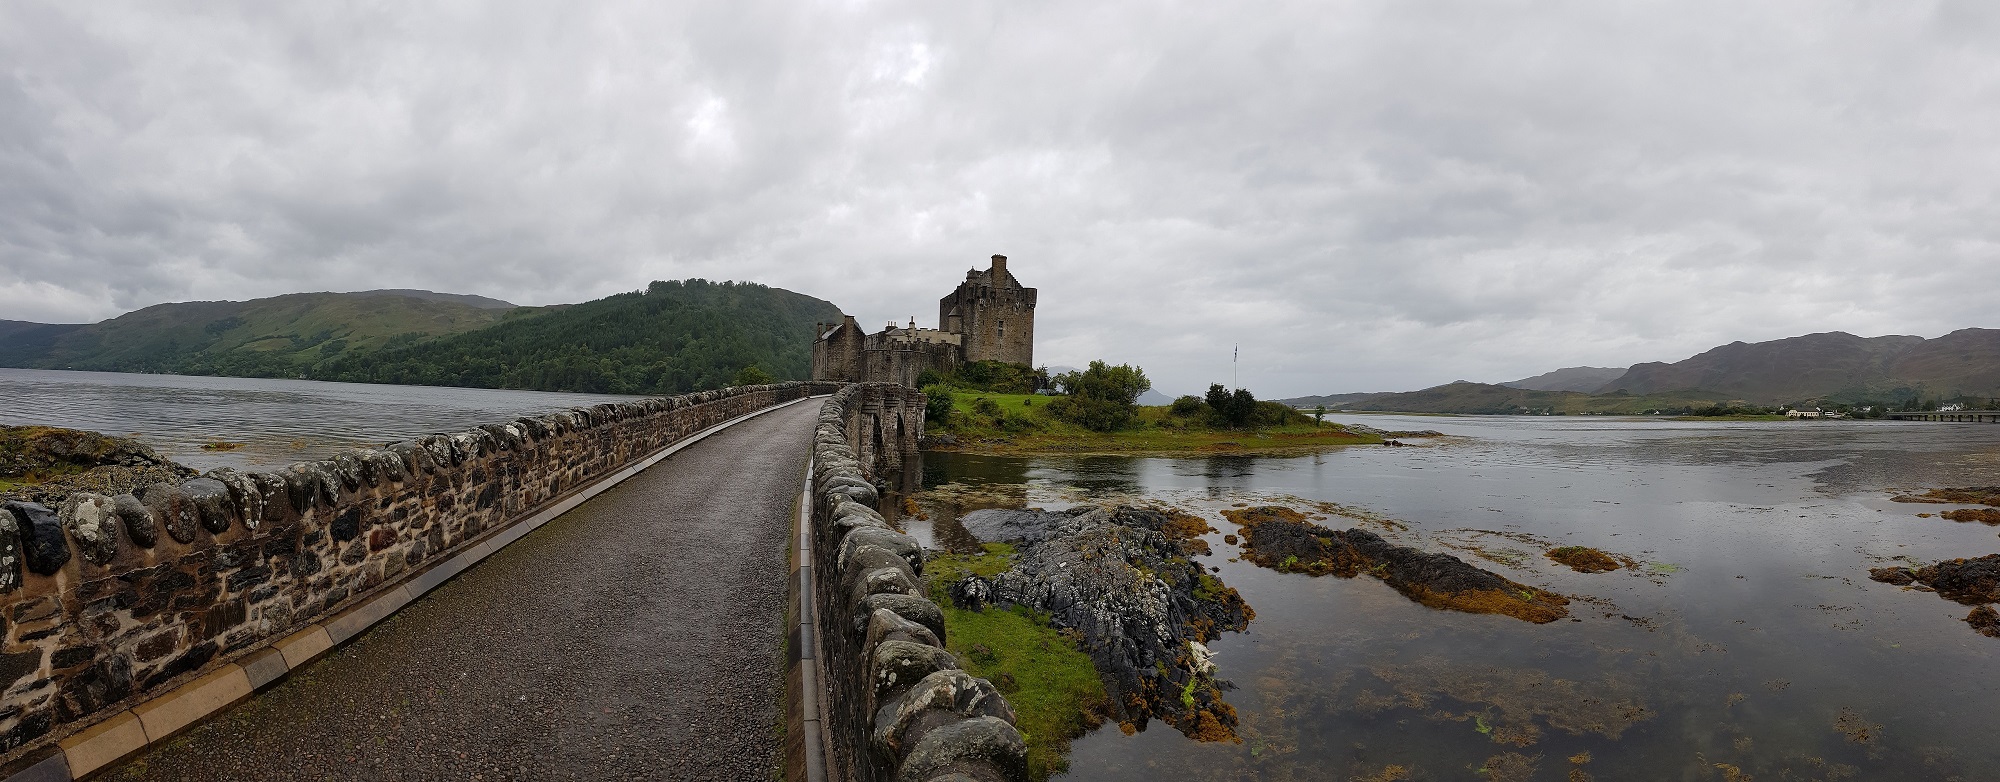 A paved road in the middle of waters leading to the castle.